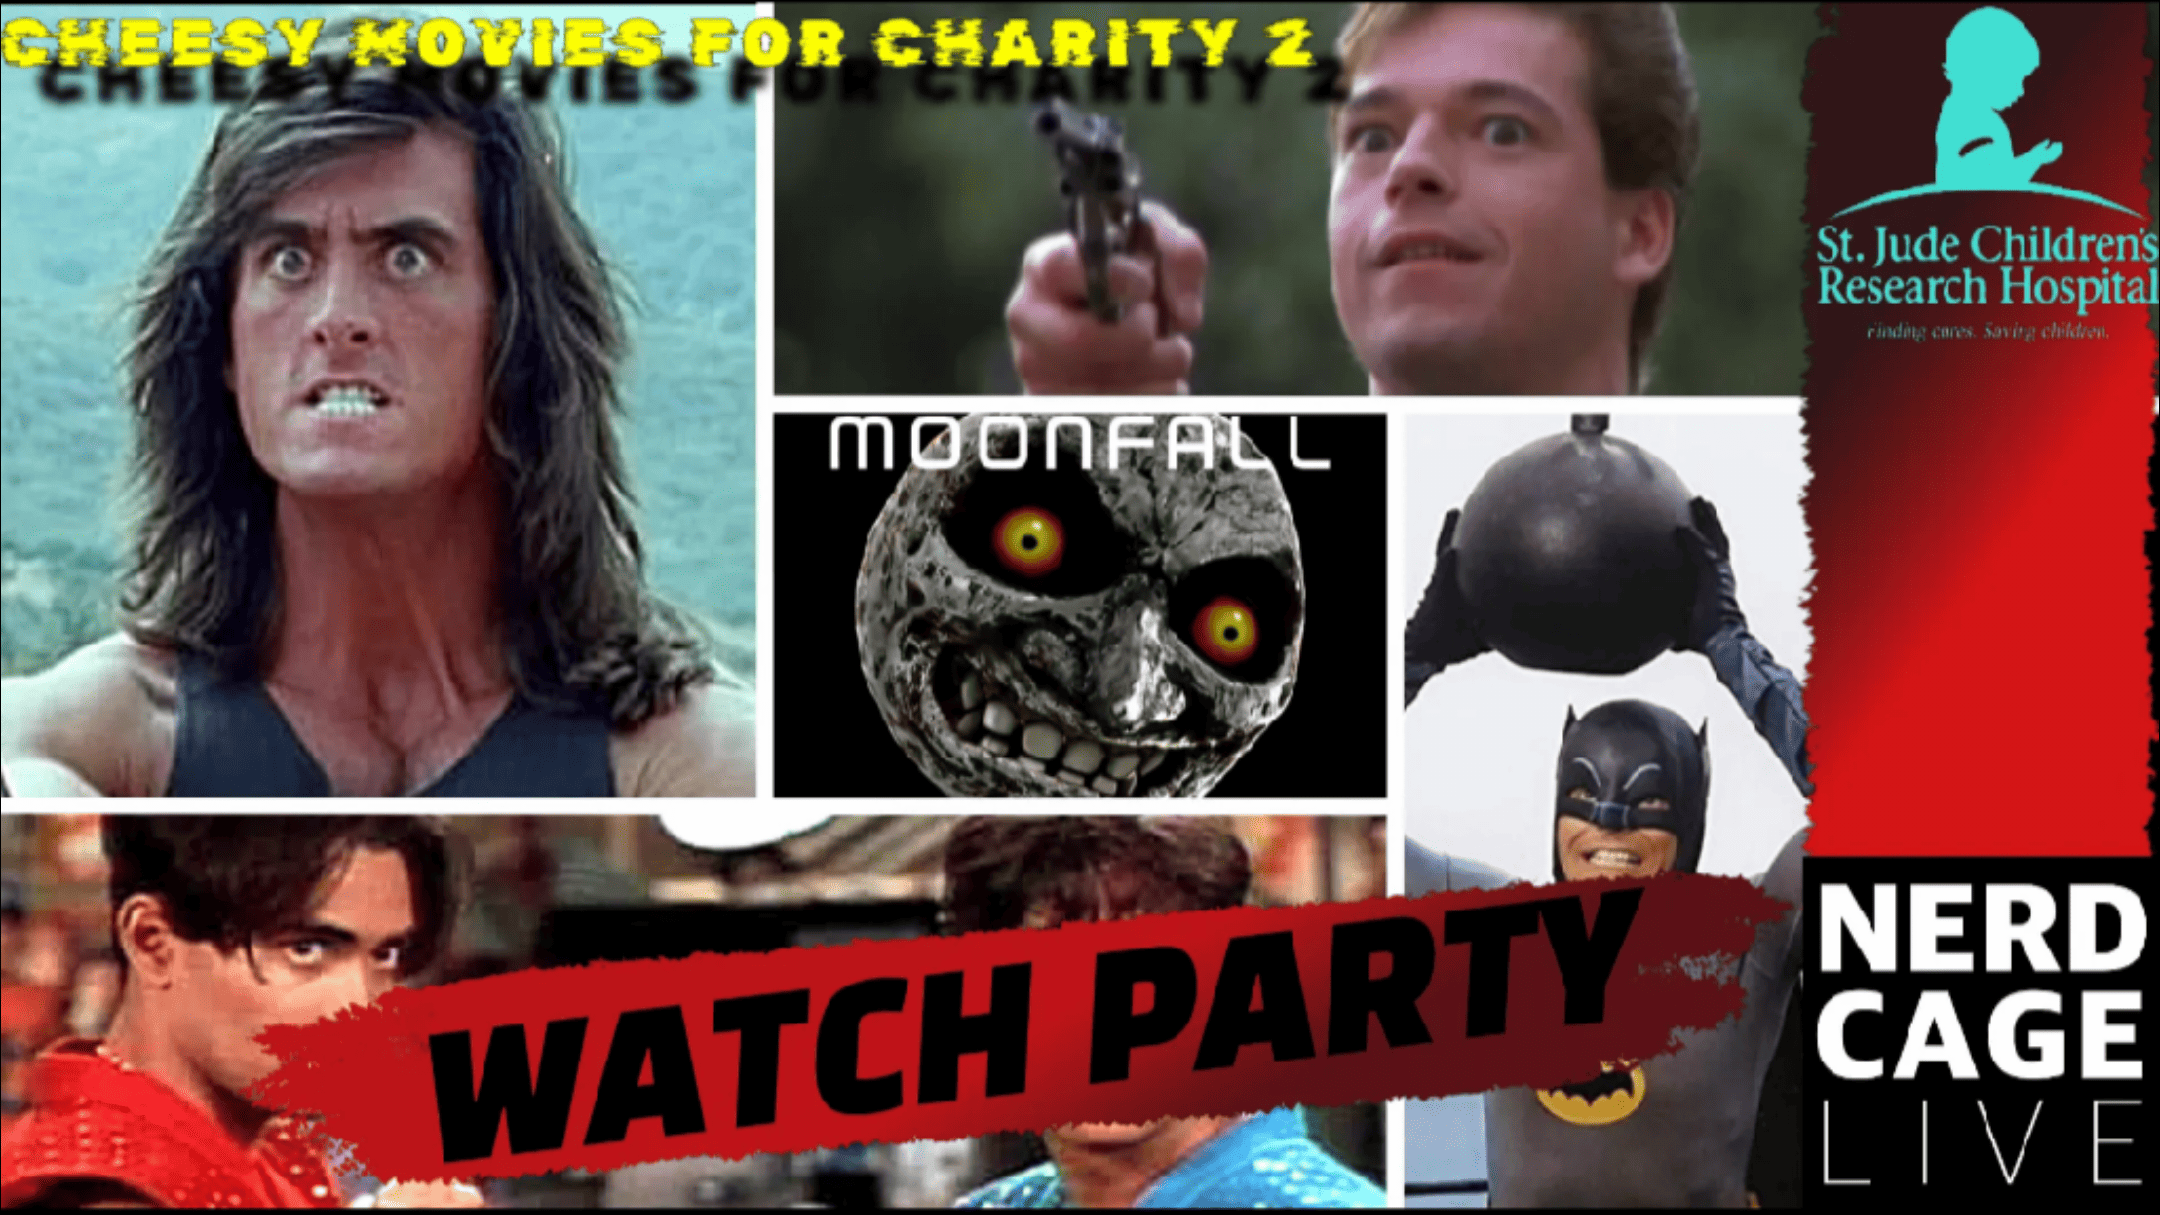 Cheesy Movies for Charity 2